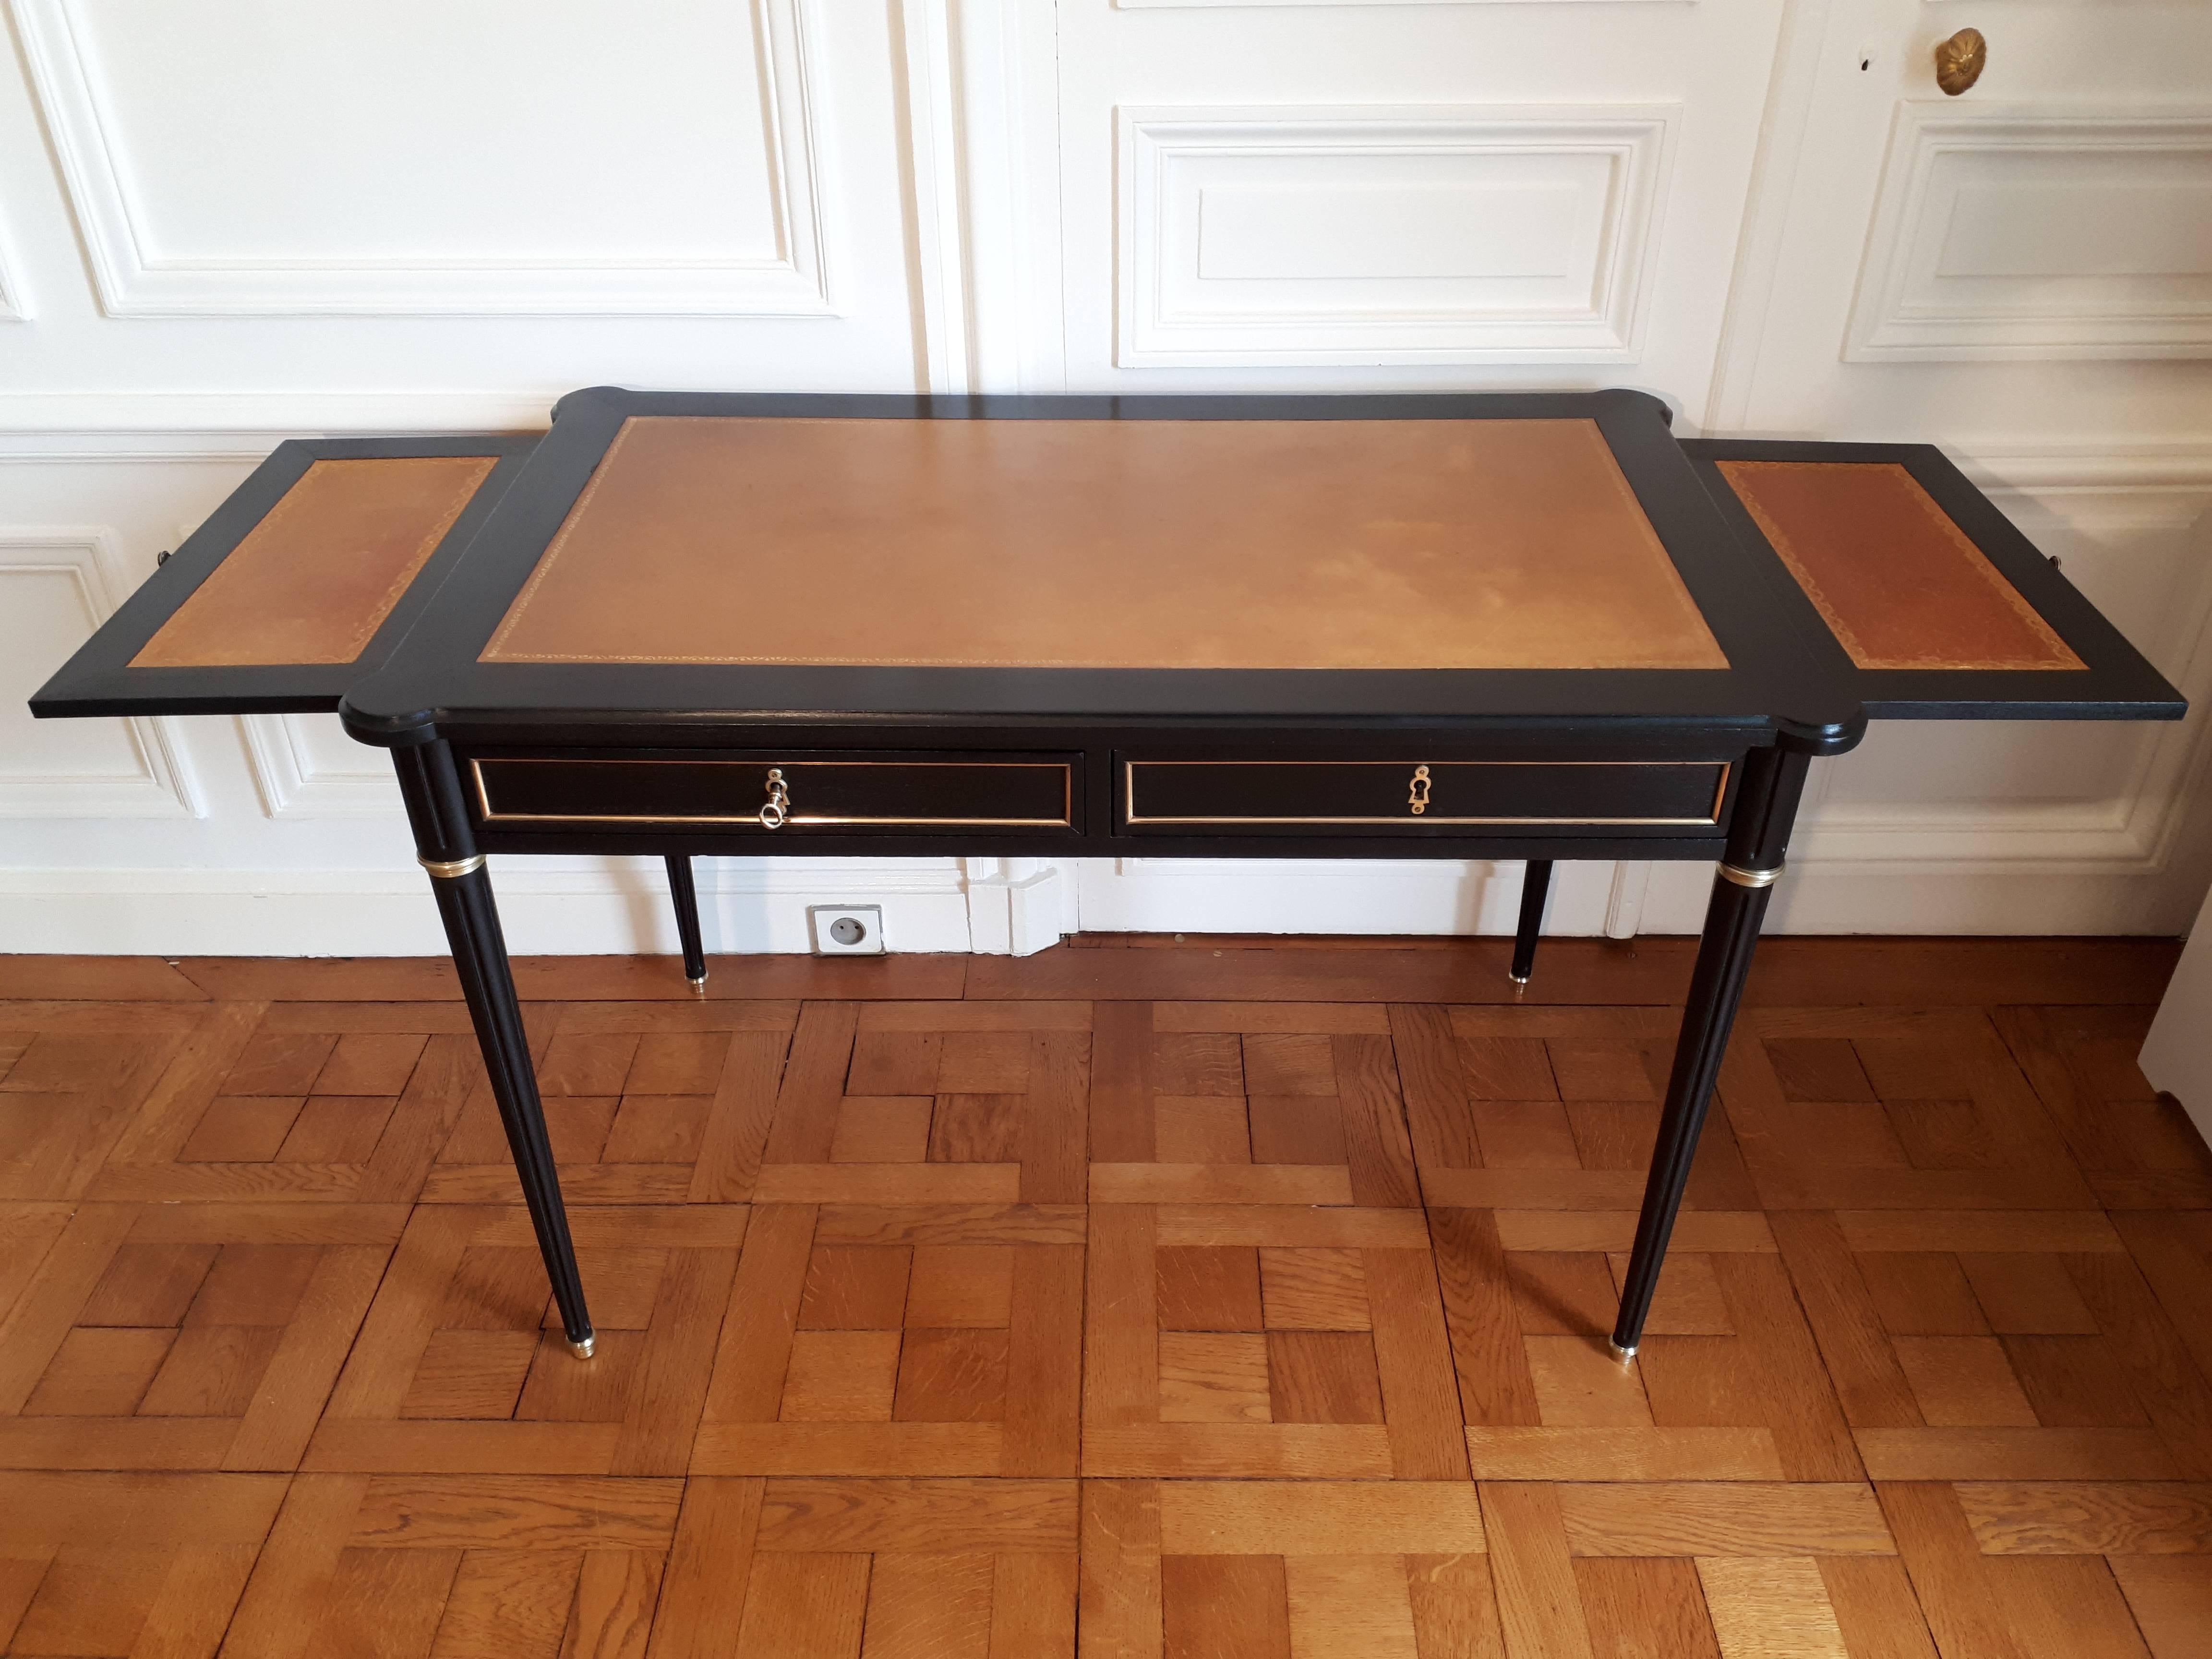 Antique Louis XVI style desk with cognac leather top and gold embossed frieze. The front of the room has two drawers with brass trim. The other three sides also have brass trim details, and each end has a sliding tray with matching cognac leather